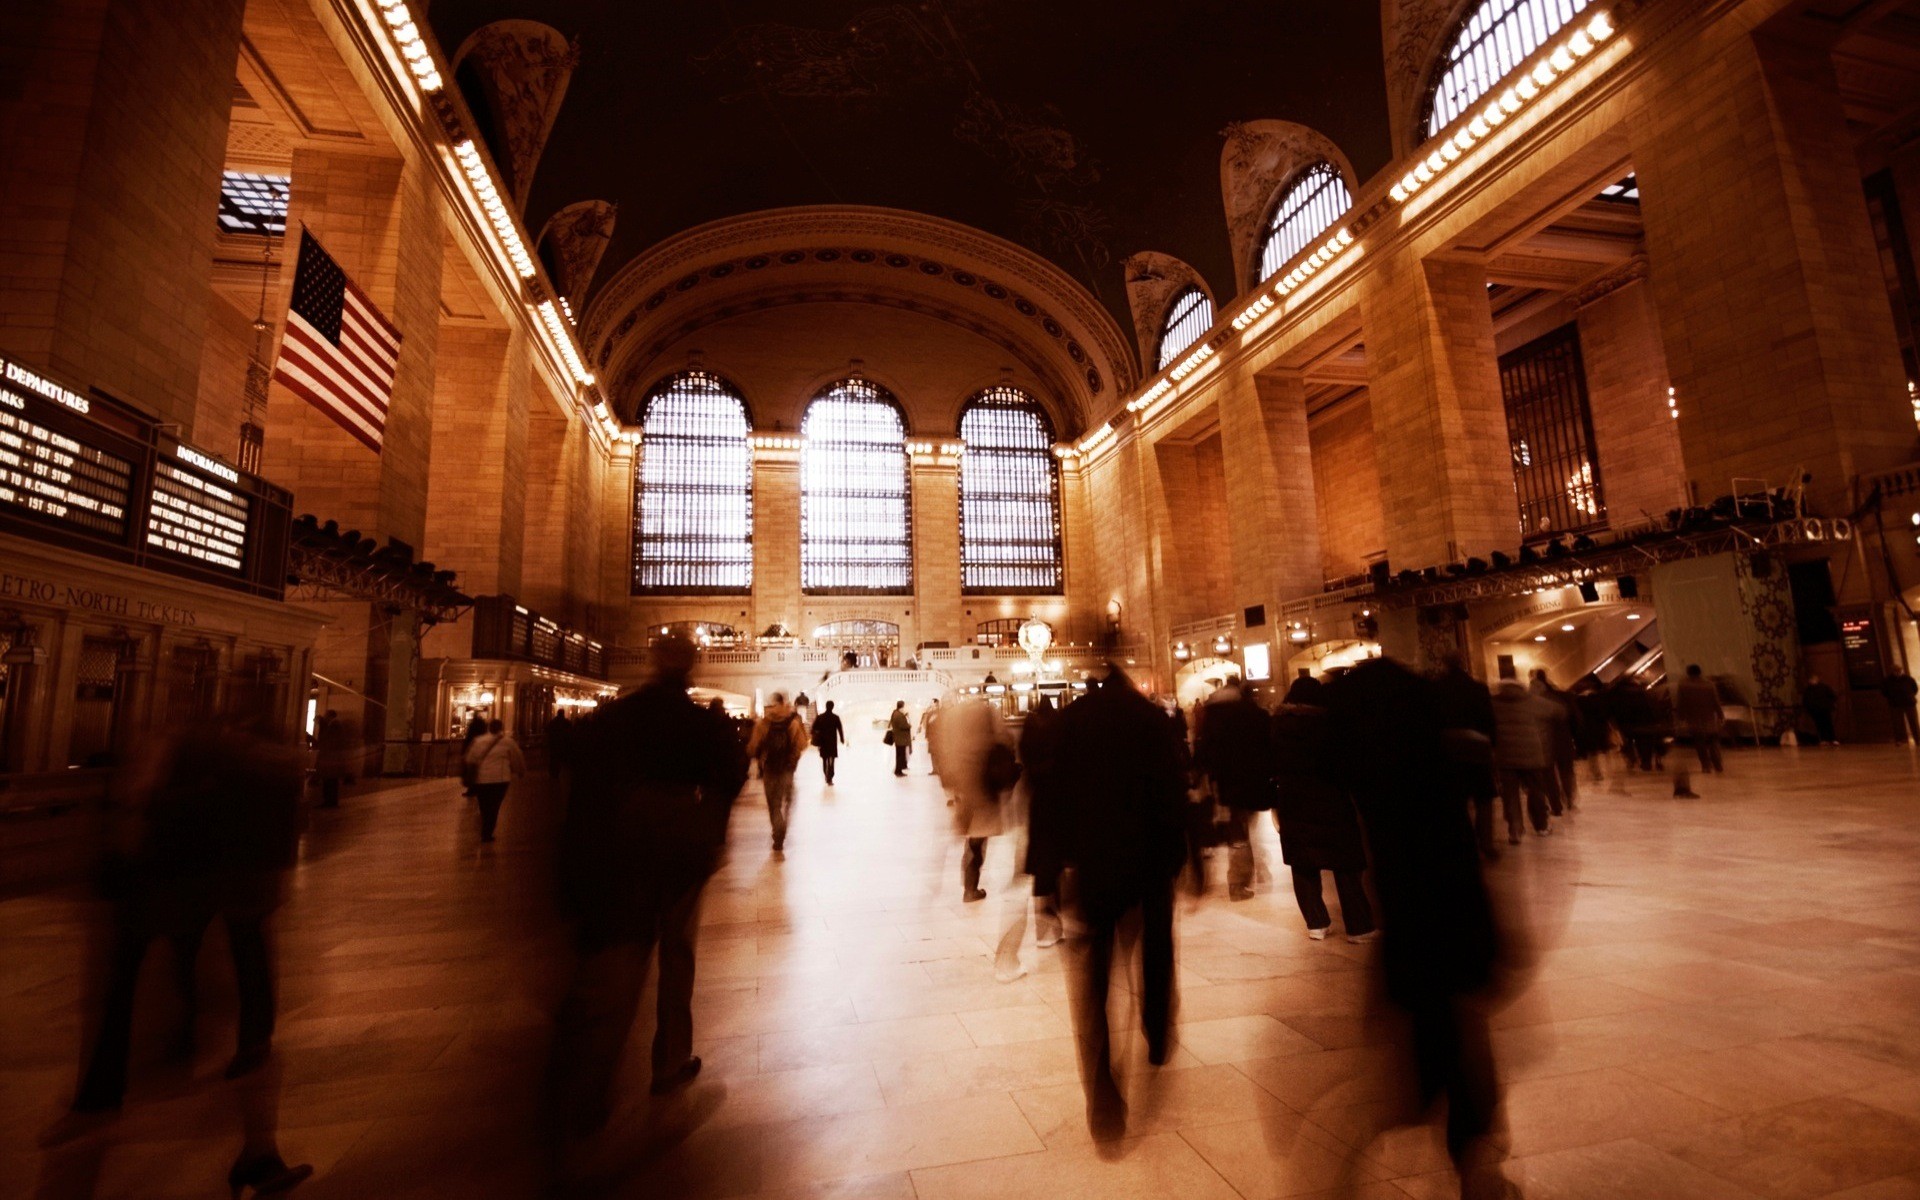 grand central station interior free image  Peakpx